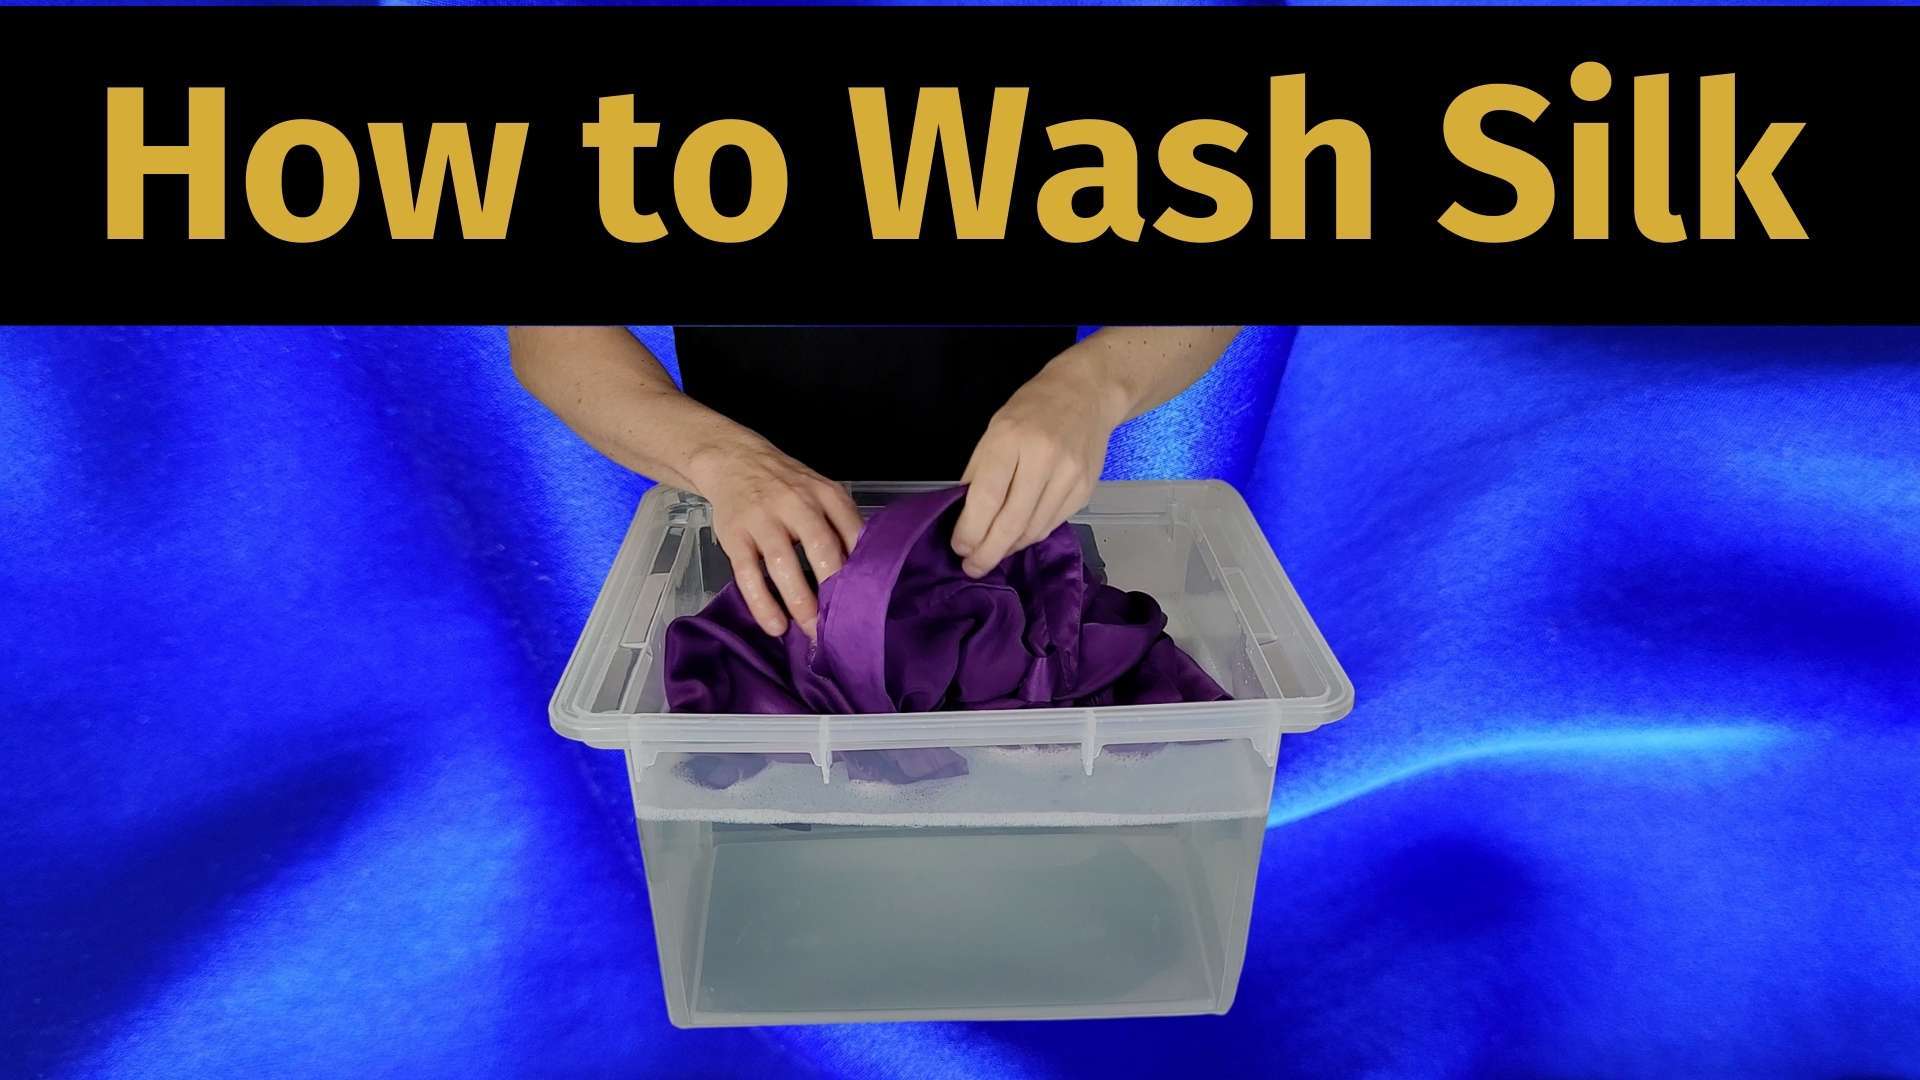 how to wash silk banner image with a picture of a man hand washing a silk shirt in a bucket full of lukewarm soapy water